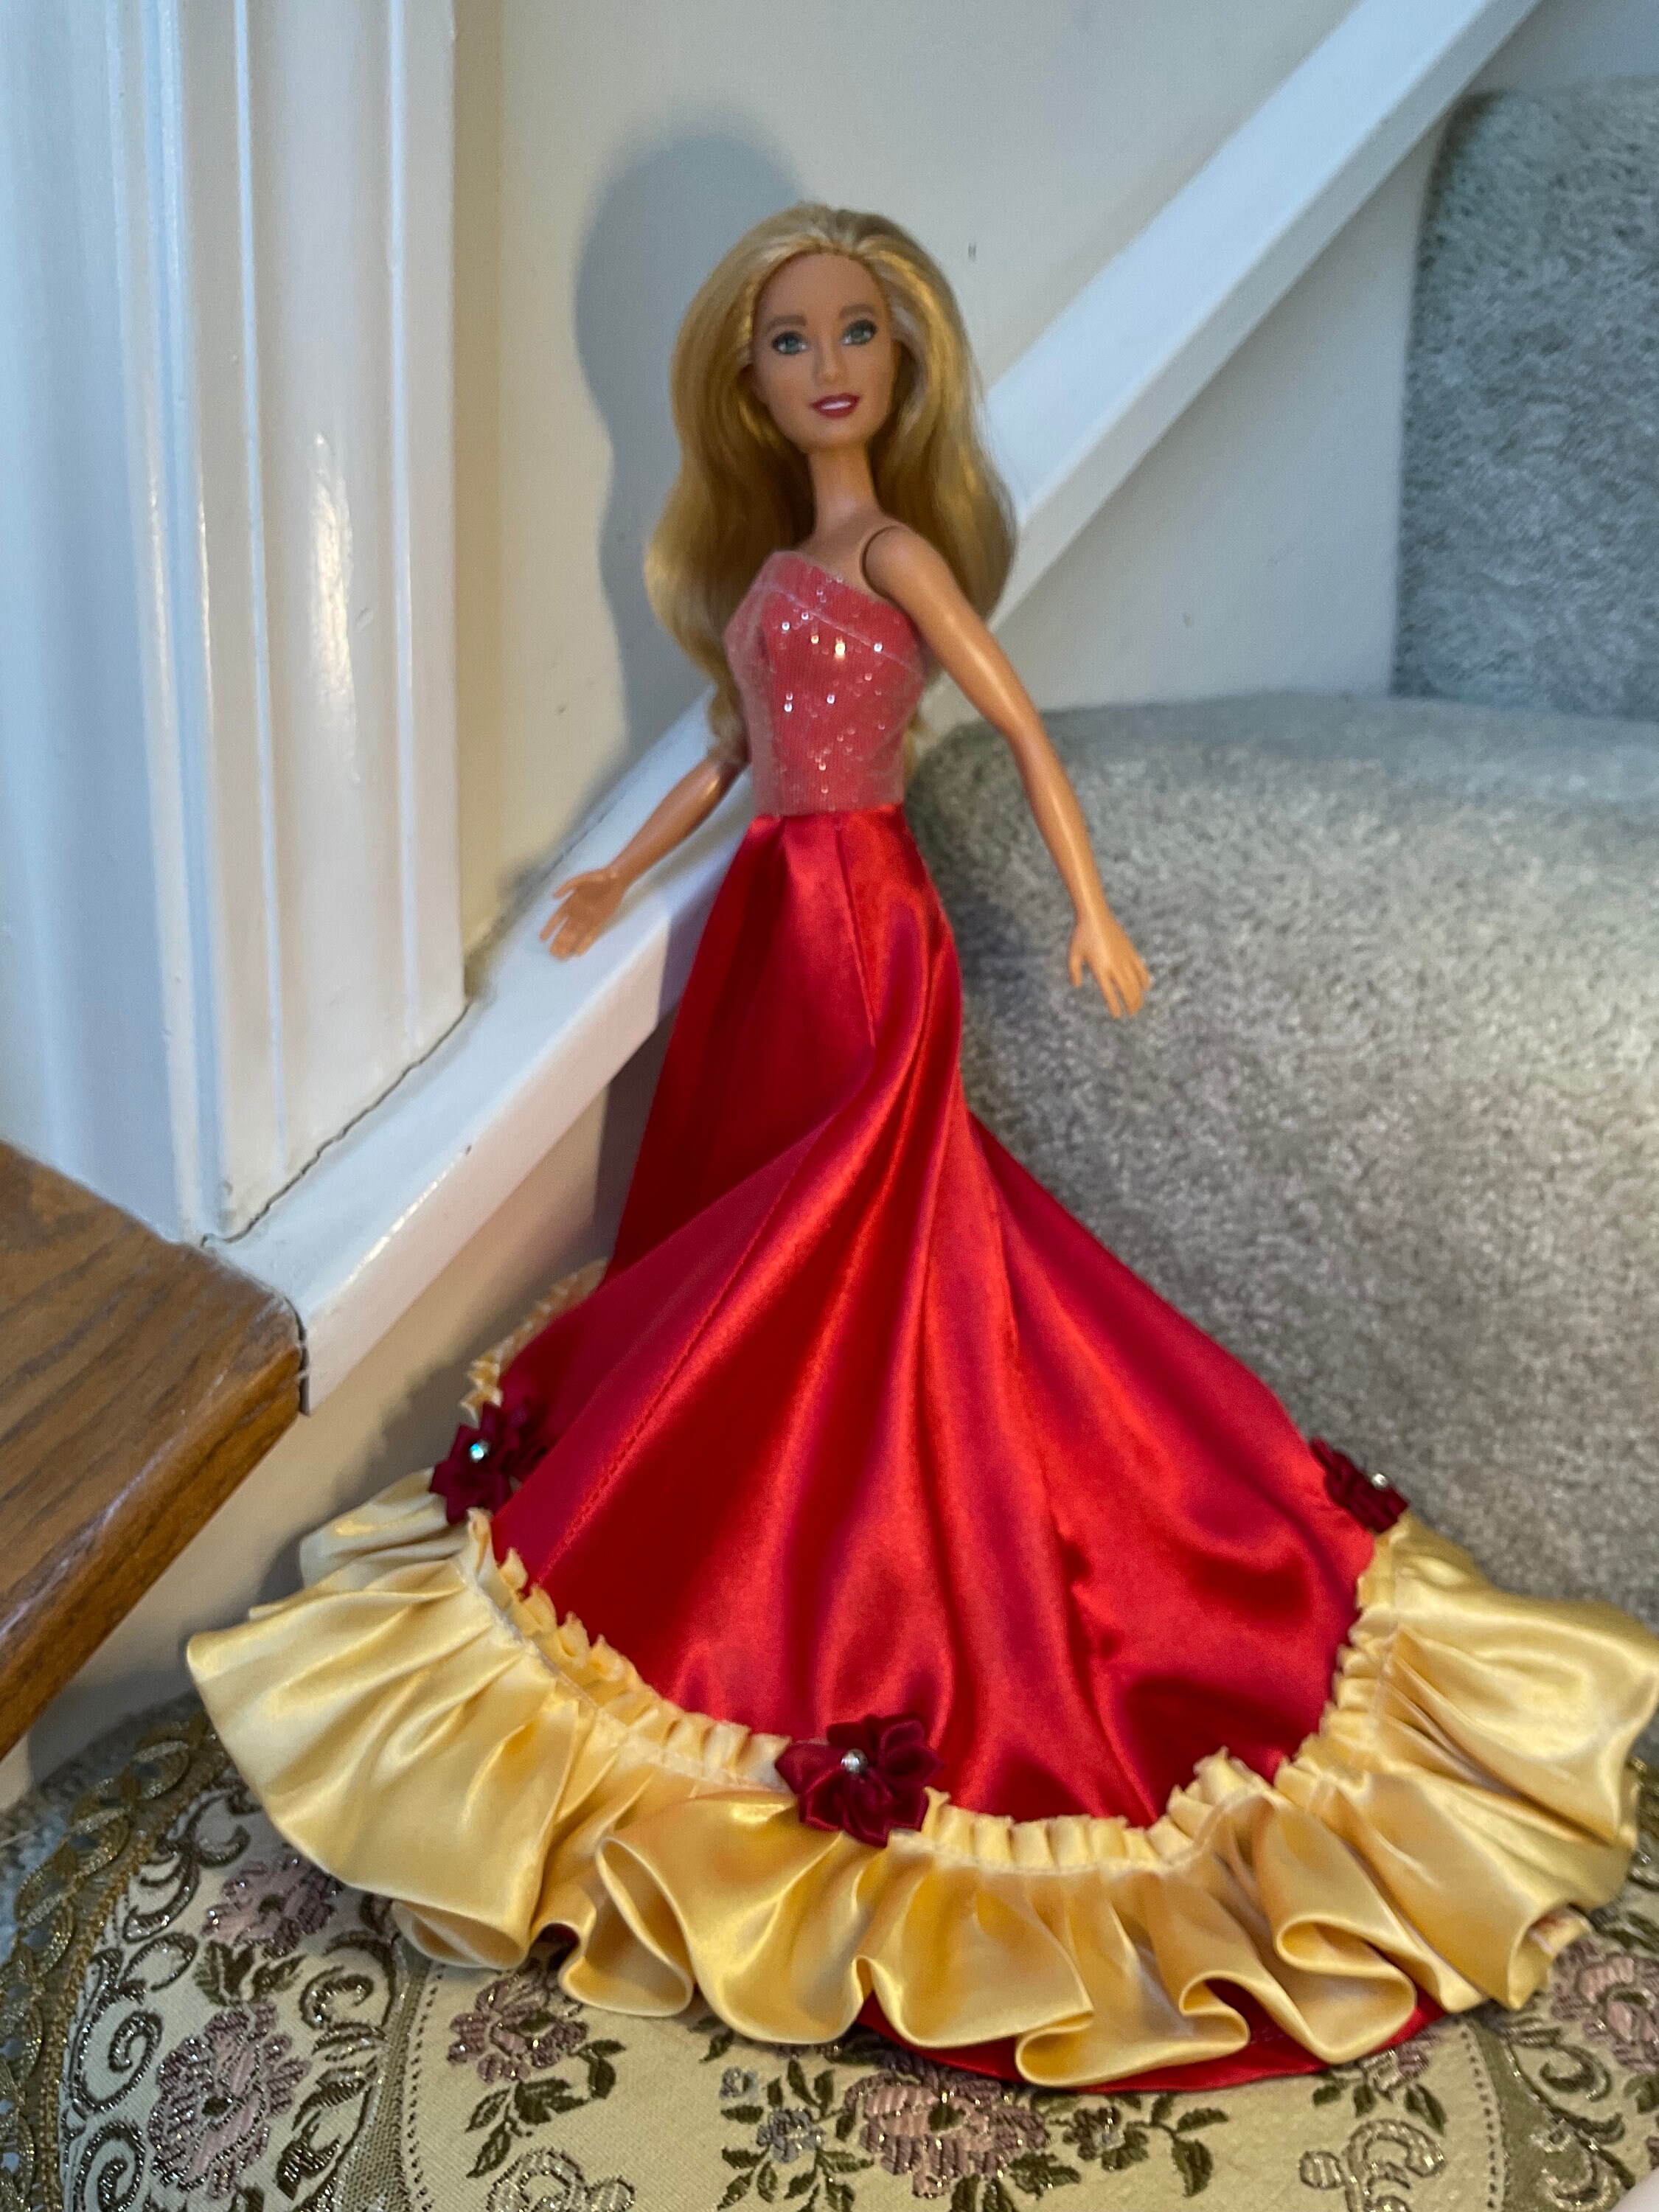 Pink Ciara Barbie Dress with Hair Accessory